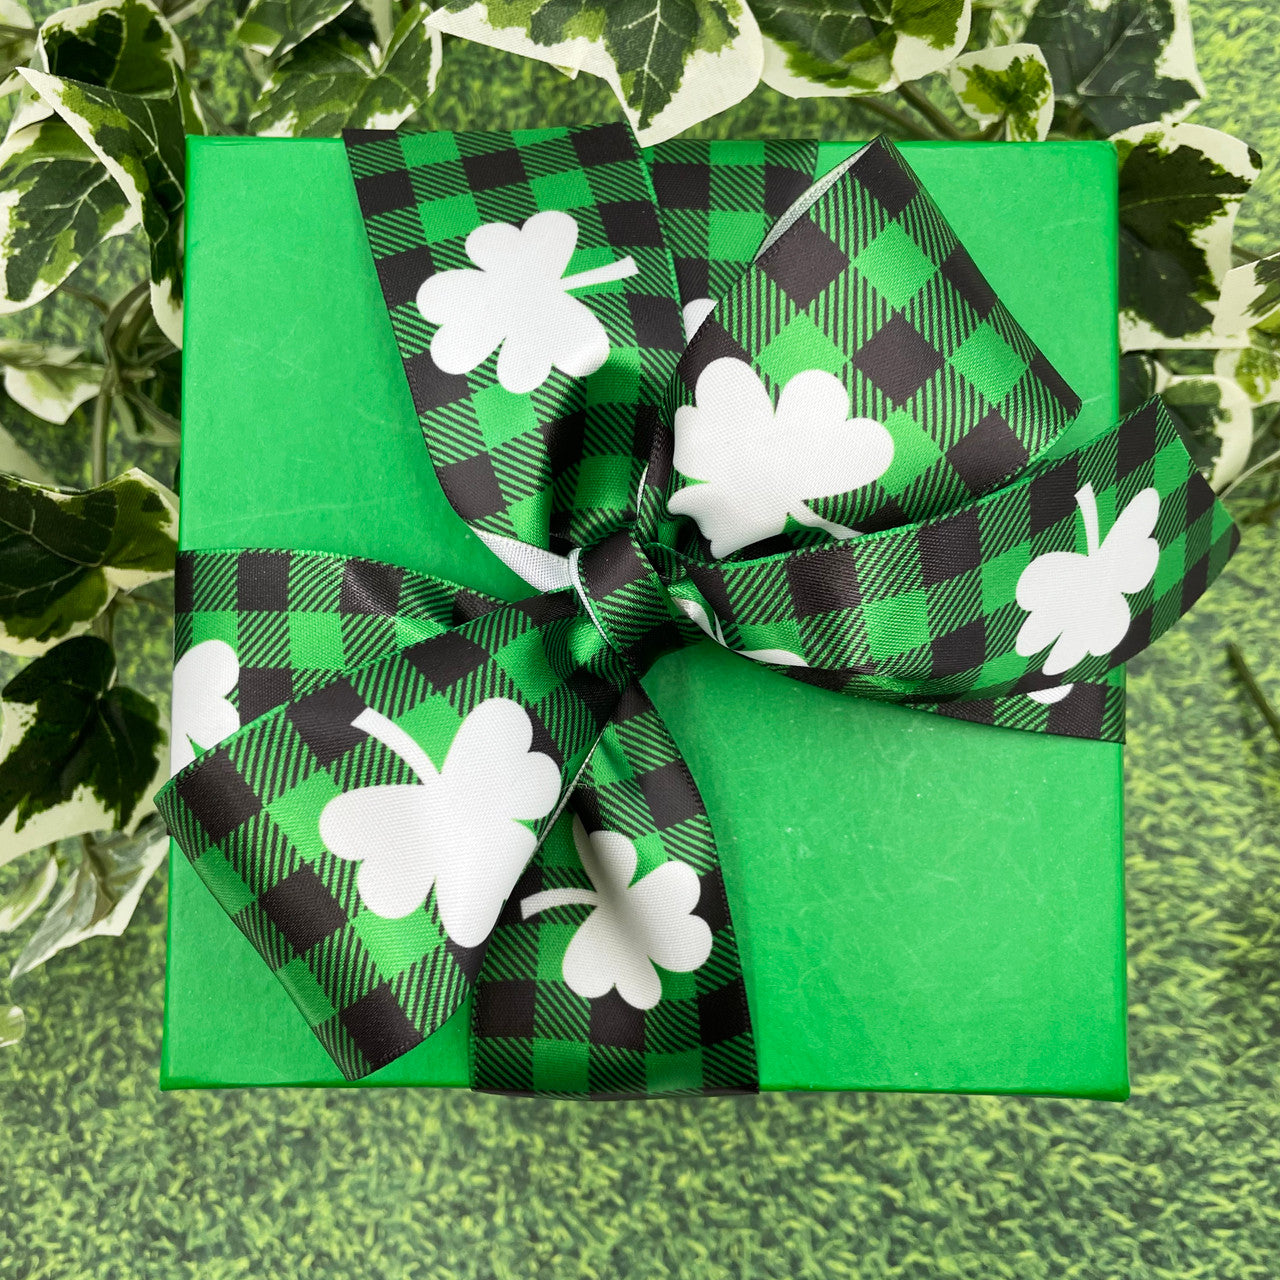 St Patrick's Day Ribbon white clover on green and black buffalo plaid background printed on 1.5" white grosgrain  and satin